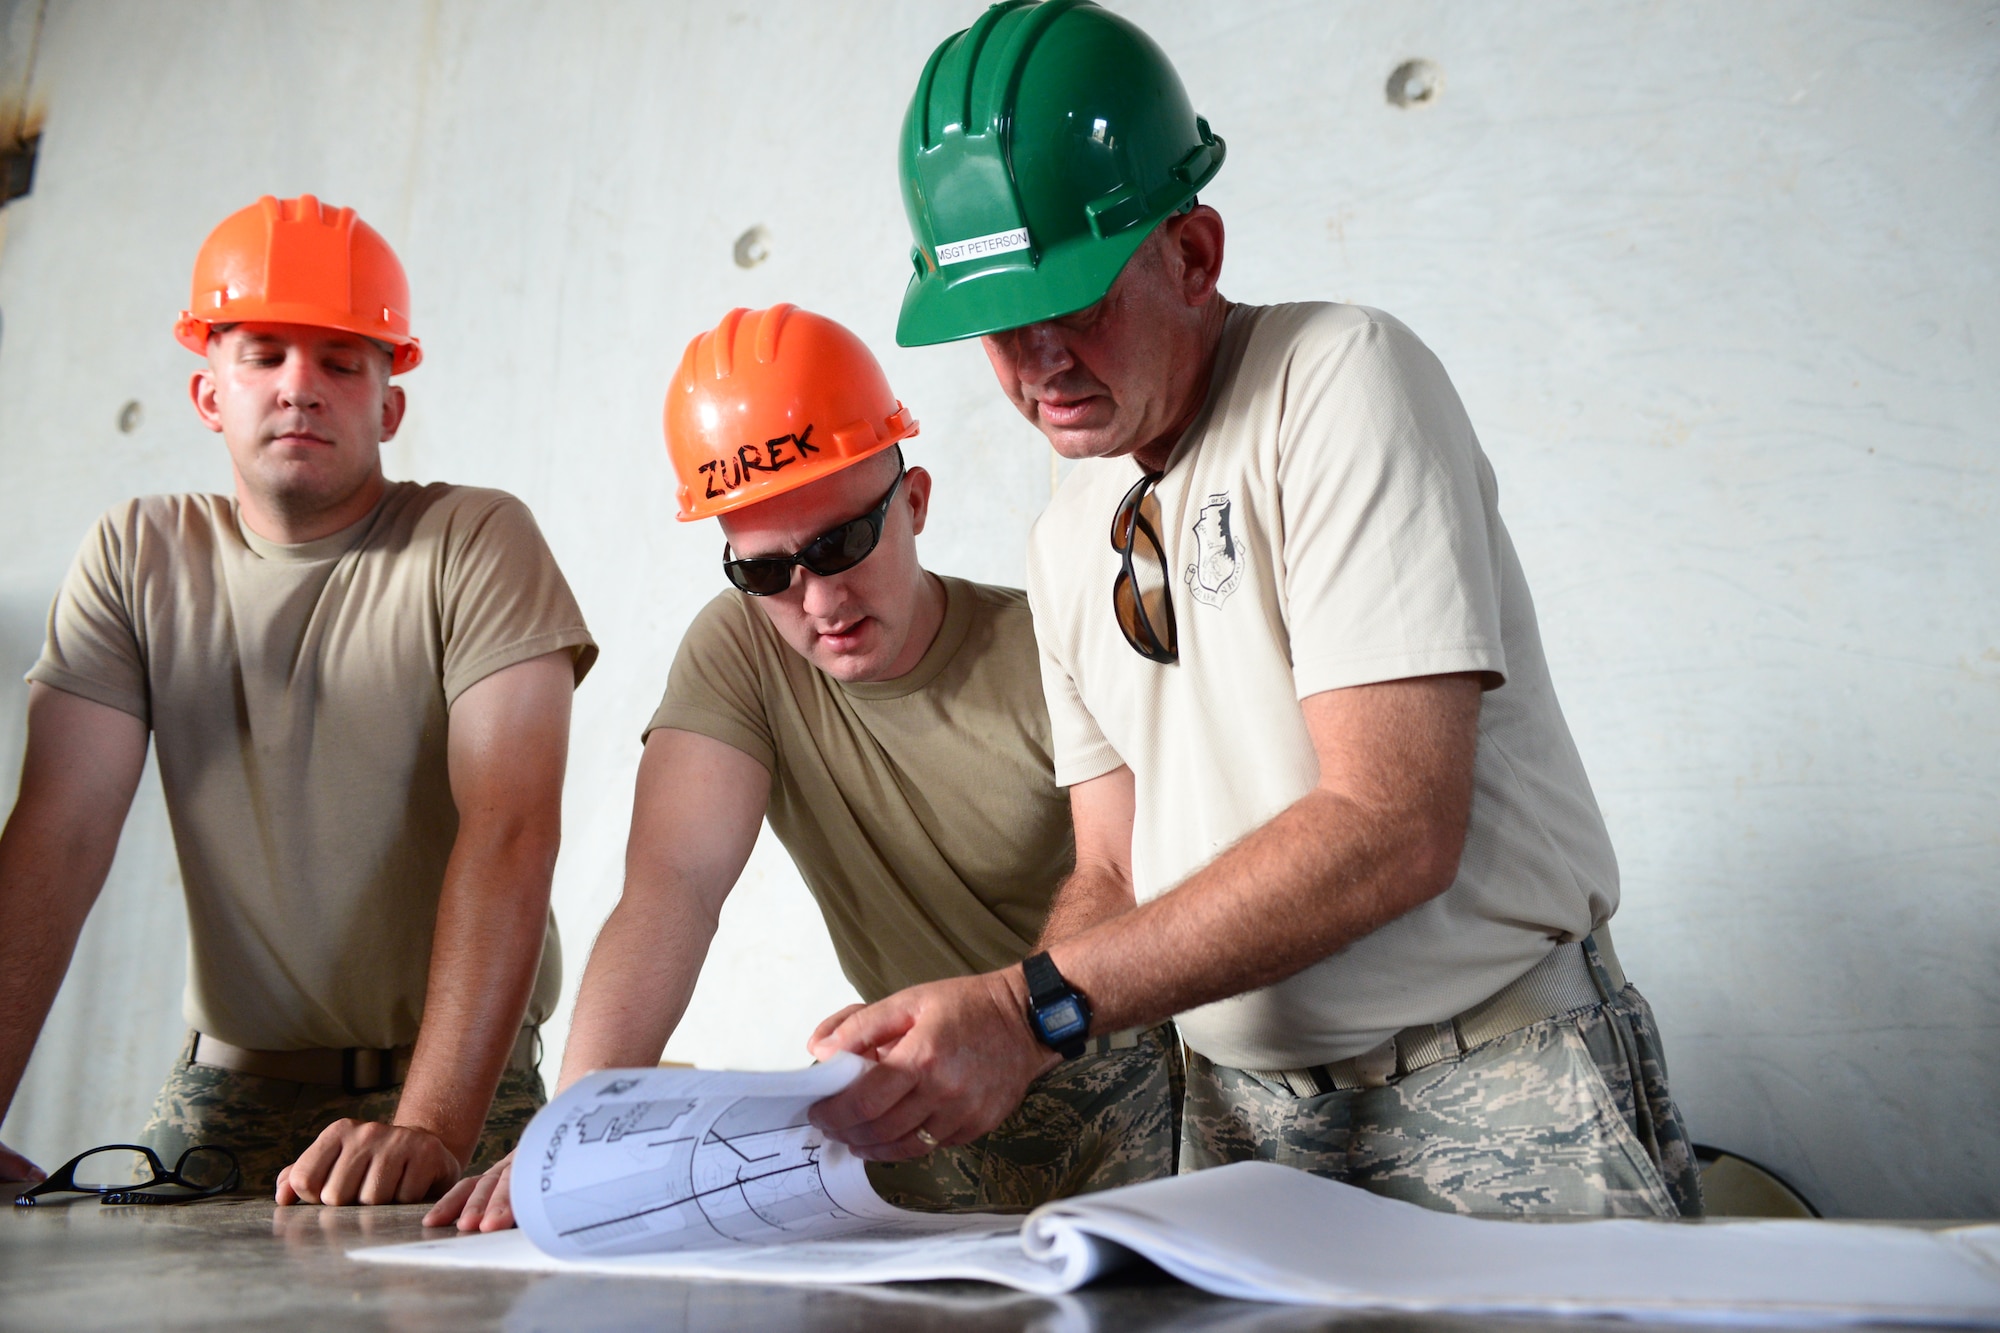 From the left, Airman First Class Matthew Johnson, Staff Sgt. William Zurek, and Master Sgt. Daniel Peterson with the 157th Civil Engineering Squadron review design plans for construction of the Commando Warrior Field Training Facility Anderson Air Force Base, Guam, June 20, 2016. 157CES Airmen are deployed to Guam for annual where they are working on a construction project for the Pacific Command Regional Training Center. (Air National Guard photo by Airman 1st Class Ashlyn J. Correia)